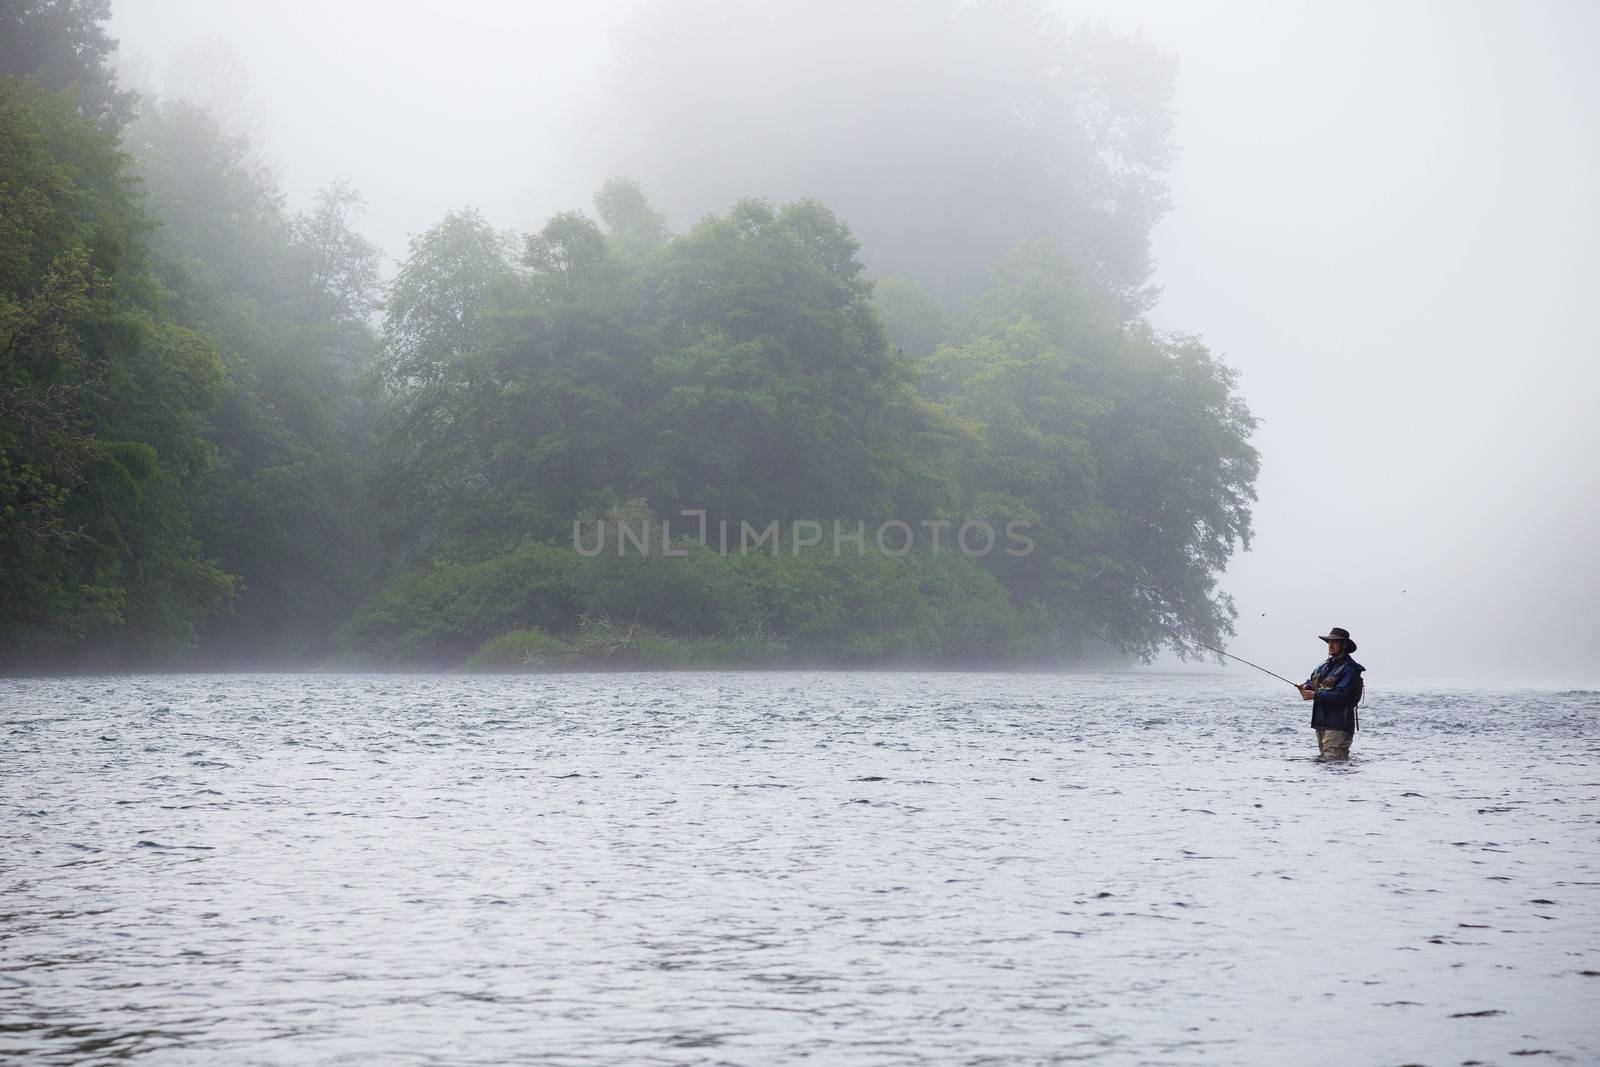 A fly fisher stands in the water and casts a line out while trying to catch steelhead in the pacific northwest. This fly fisherman has a great cast and is very experienced, standing in a foggy scene on the river.